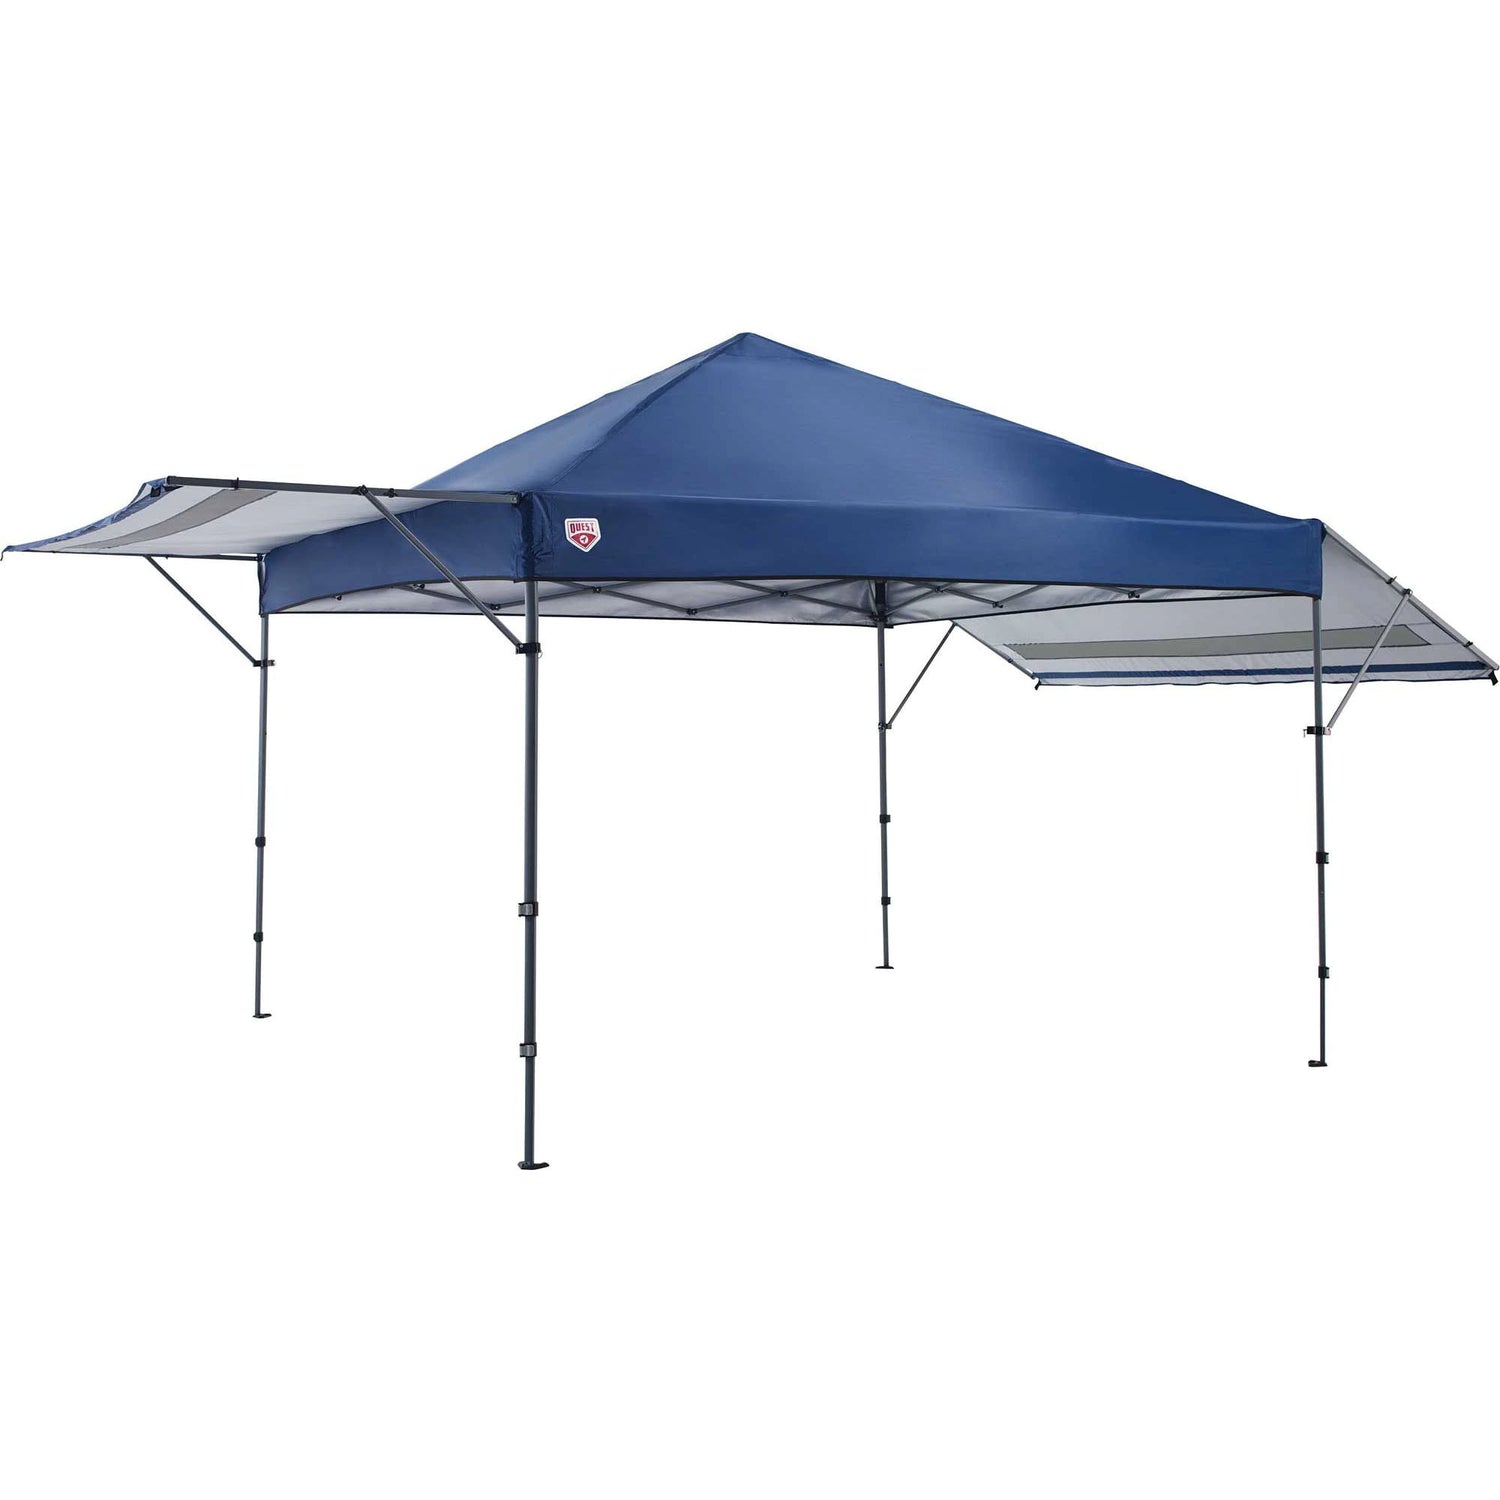 Quest Q170 Quick Lift Dual Awning Canopy